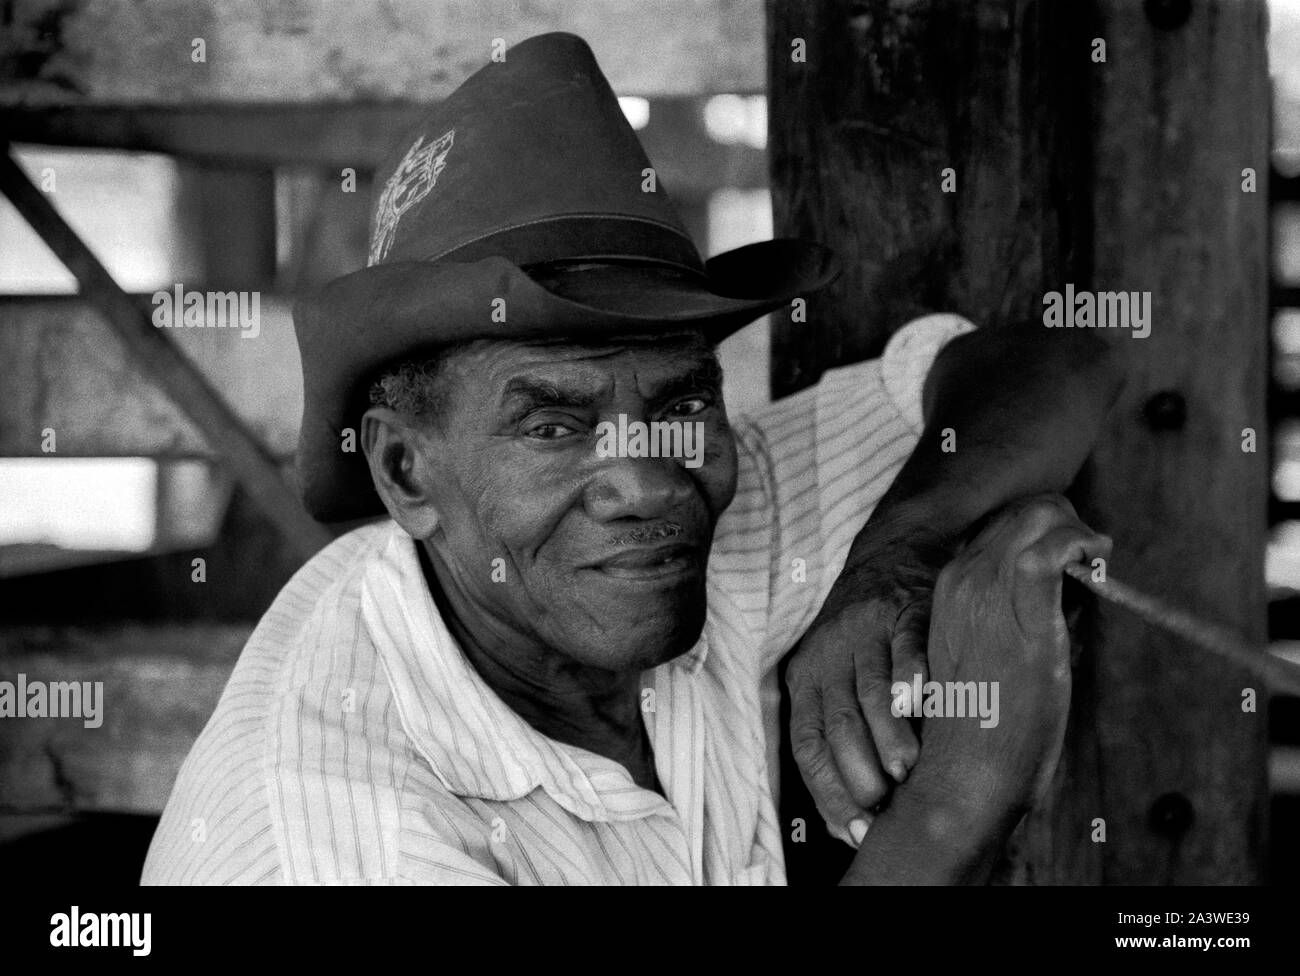 Brazil, Bahia, Feira de Santana: a herdsman from Sertao is leaning on the fence of his horses. In the somatic traits of the Sertao herdsme Stock Photo